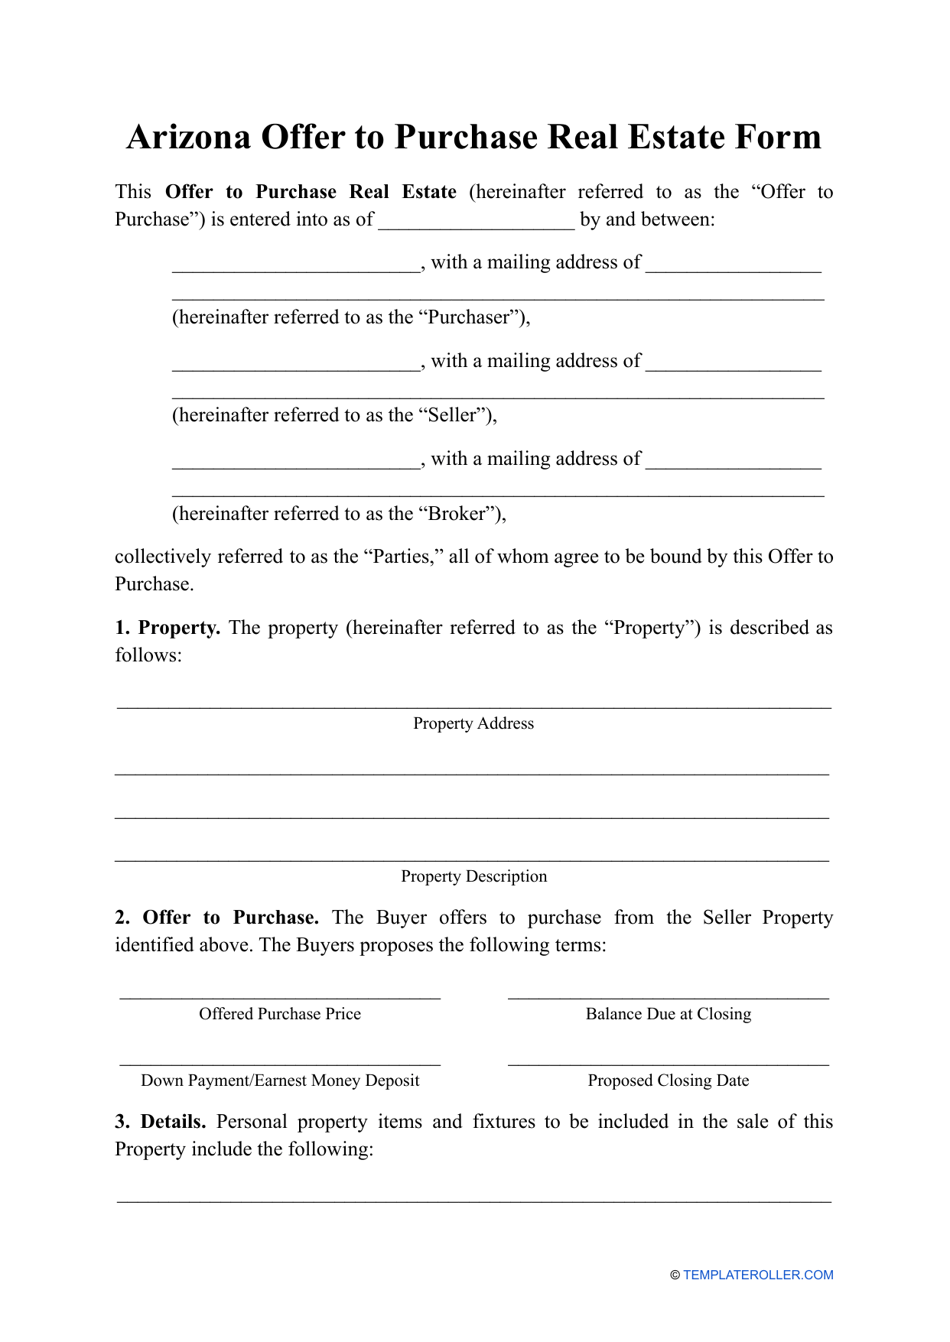 Offer to Purchase Real Estate Form - Arizona, Page 1